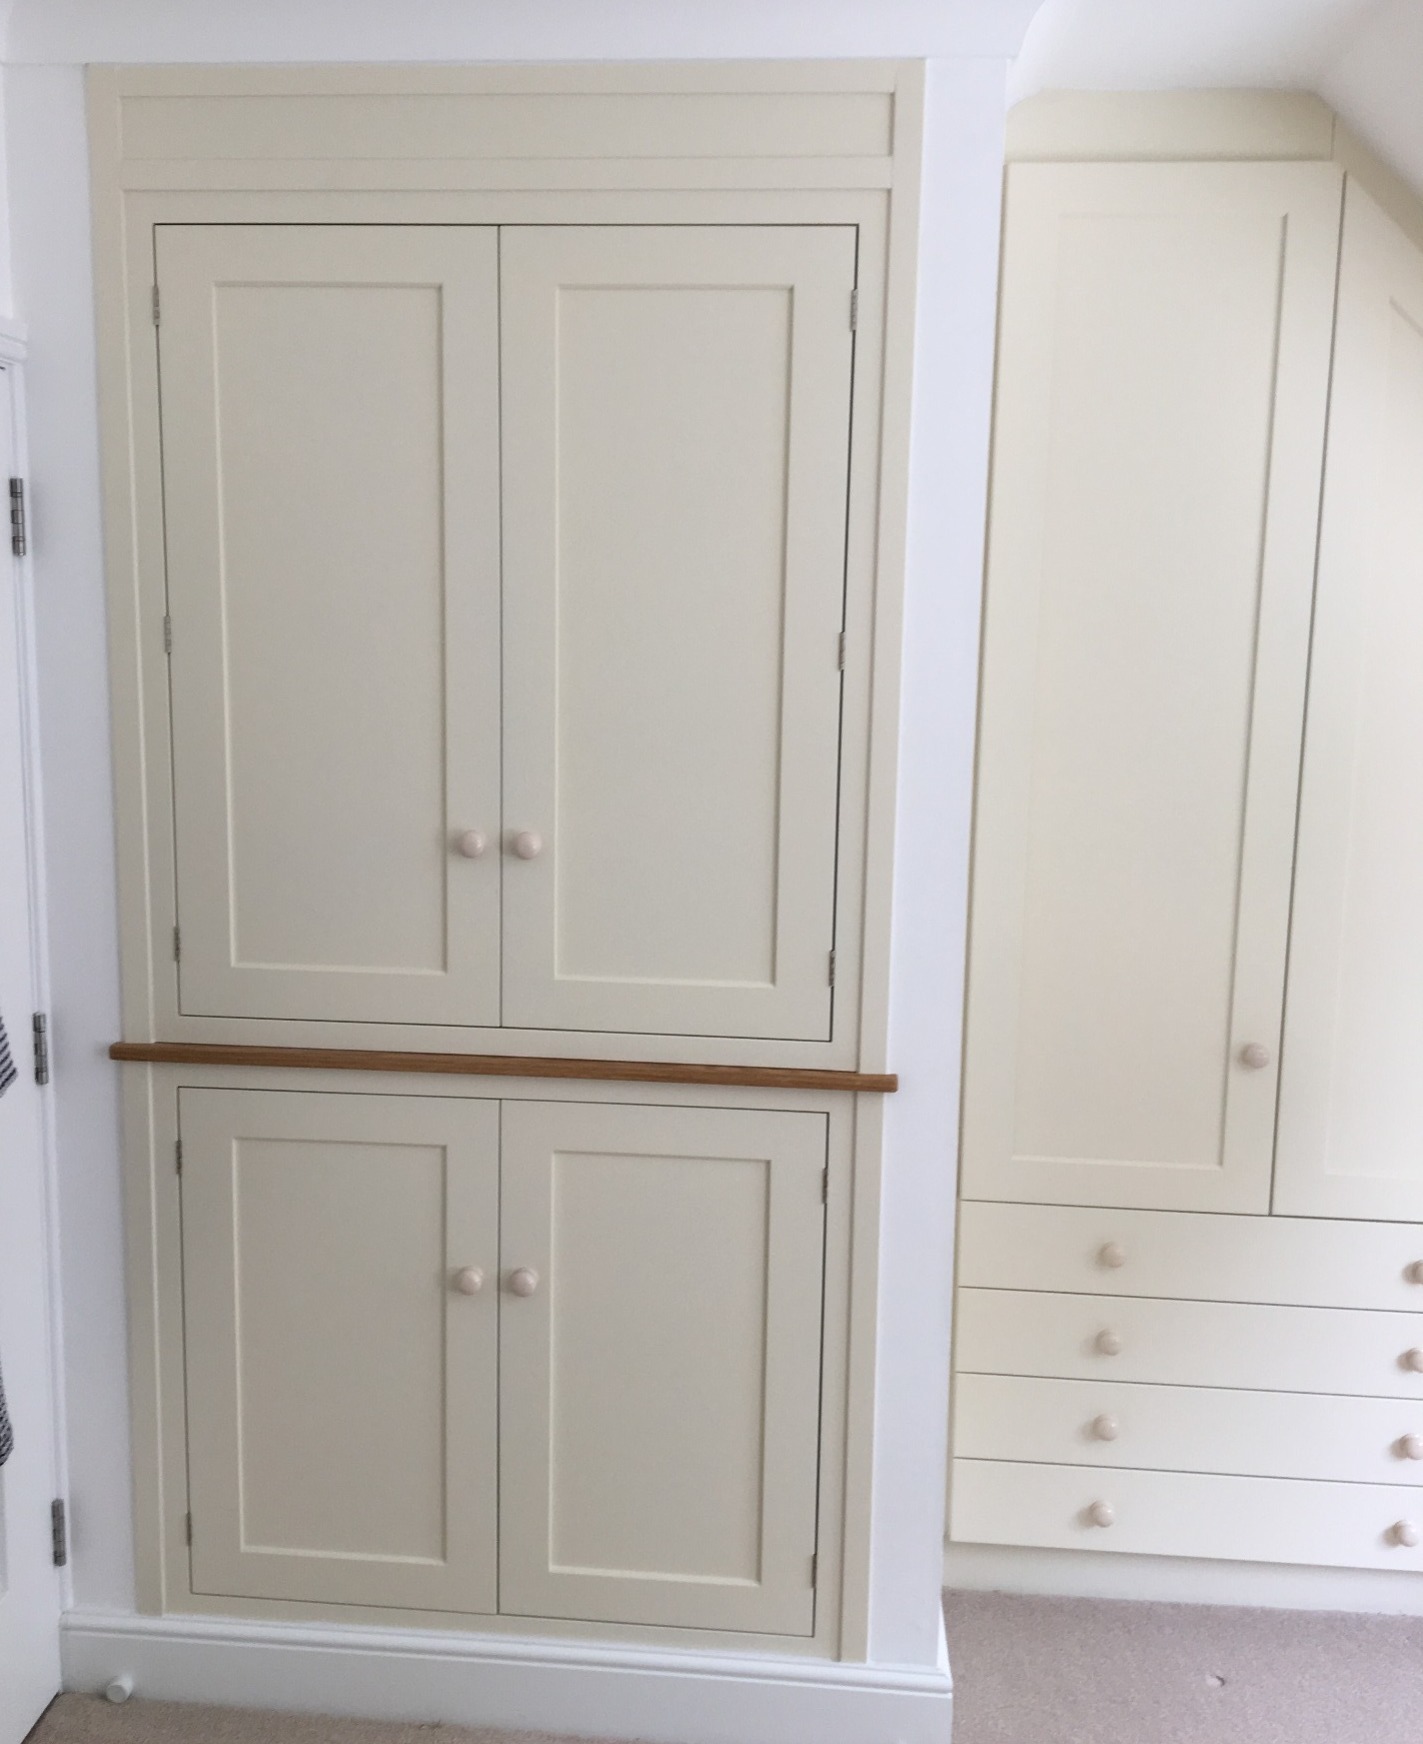 Built-in storage with drawers and doors